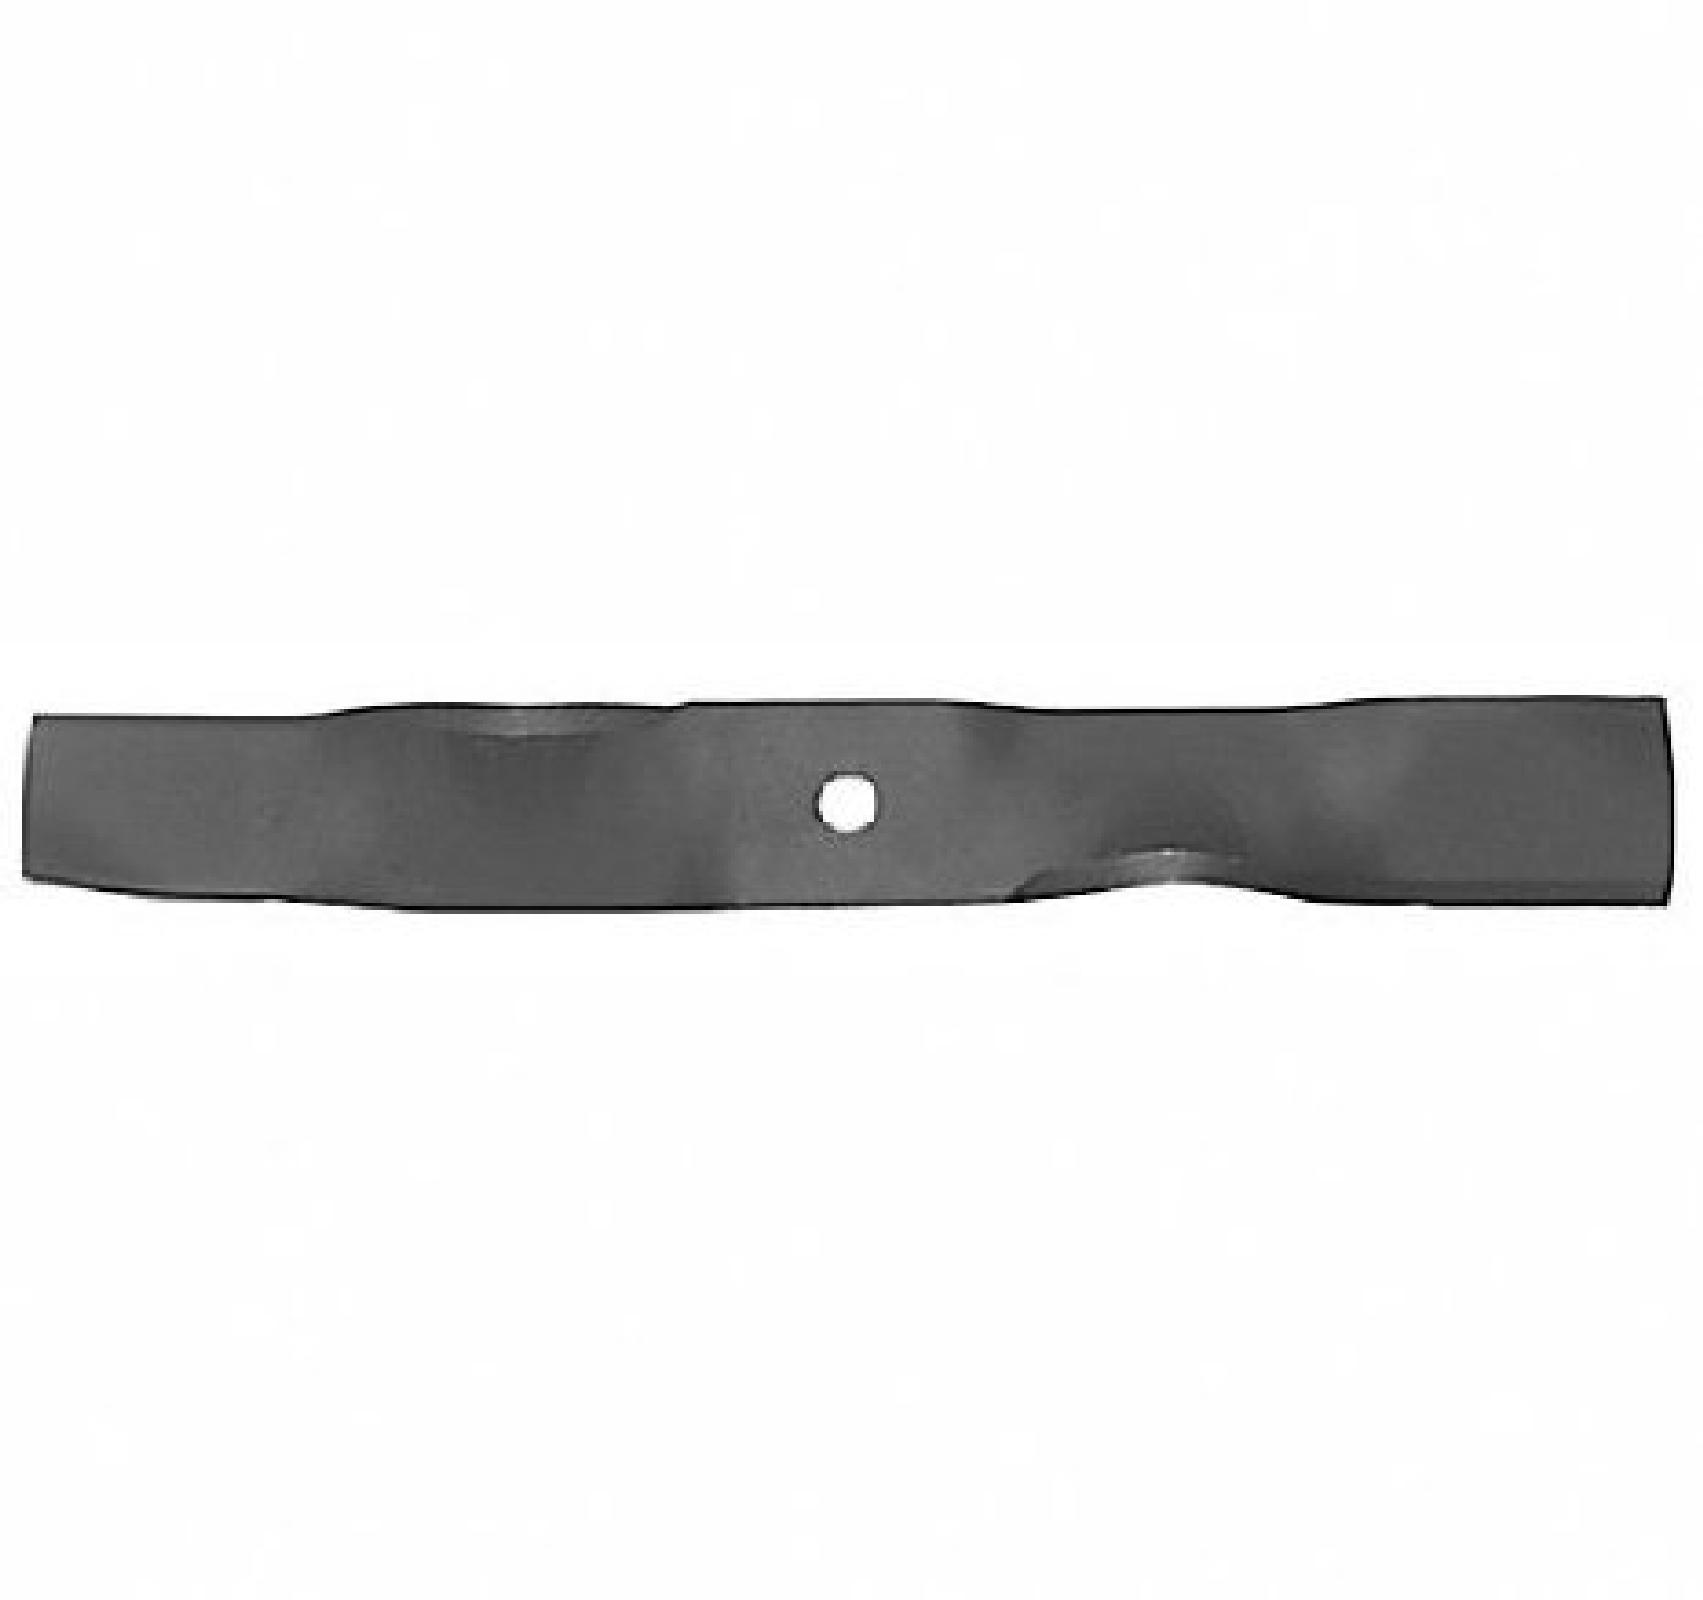 BLADE, JOHN DEERE, M11299 part# 91-403 by Oregon - Click Image to Close